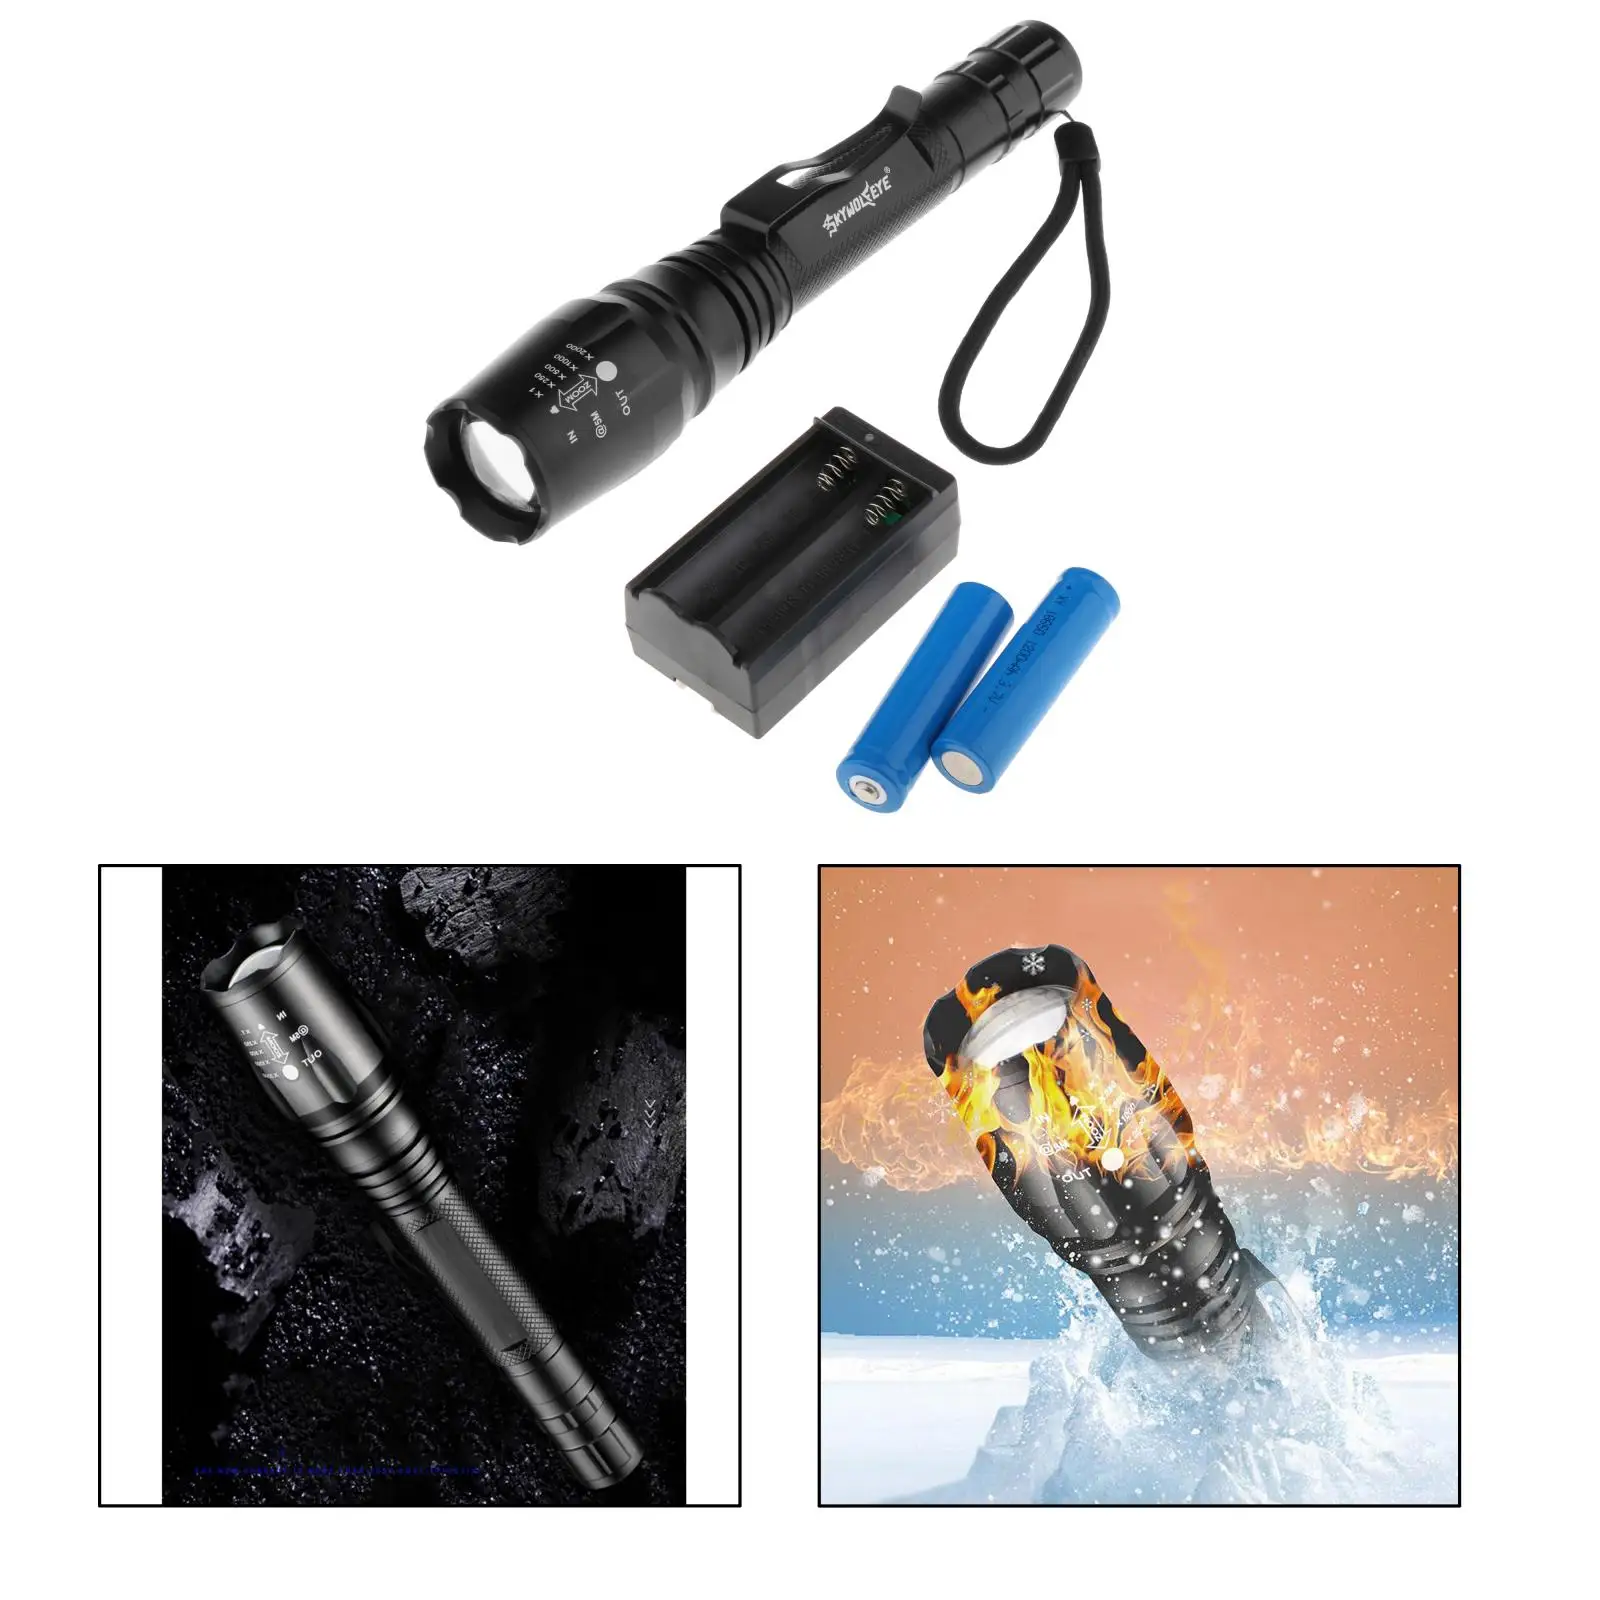 LED Tactical Flashlight 5 Modes, Waterproof, Zoomable, Solid Handheld Light Torch with Lanyard, 18650 Batteries, Charge Adapter